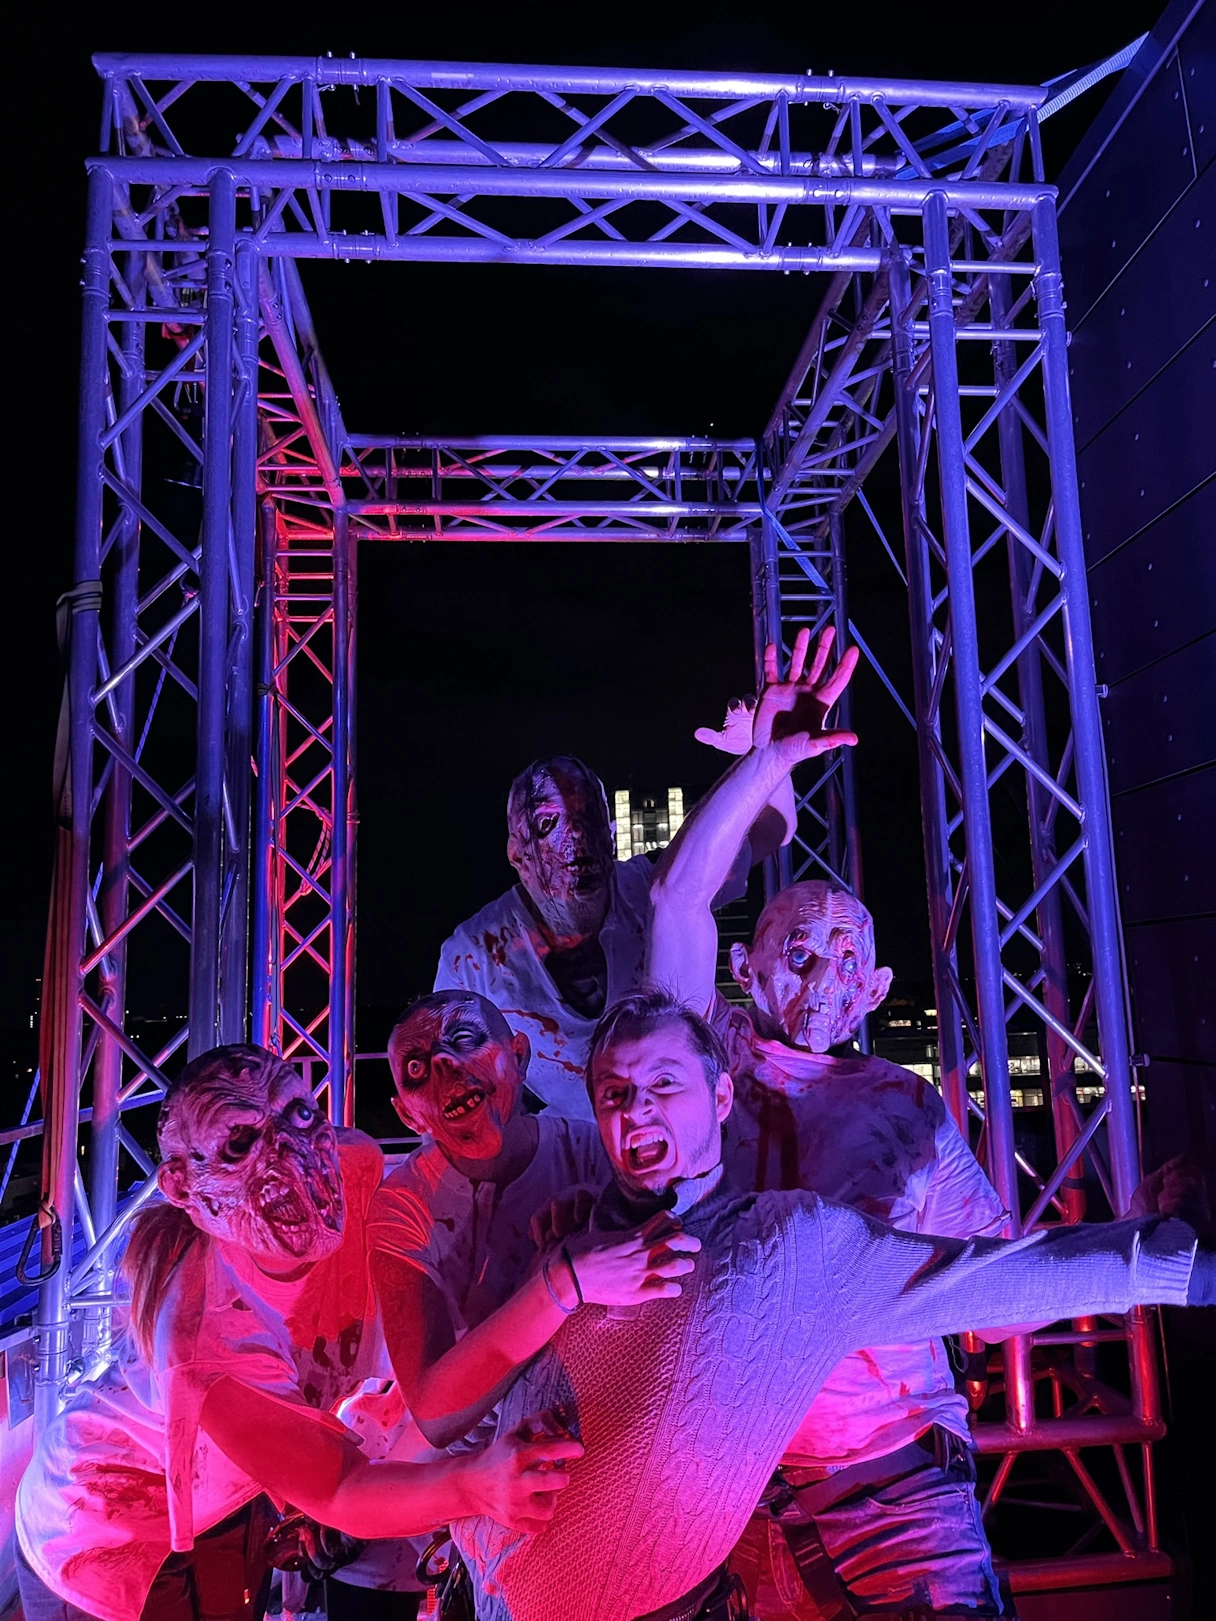 4 people dressed up as monsters and a frightened looking person in the middle. It is dark and they are illuminated by colored light